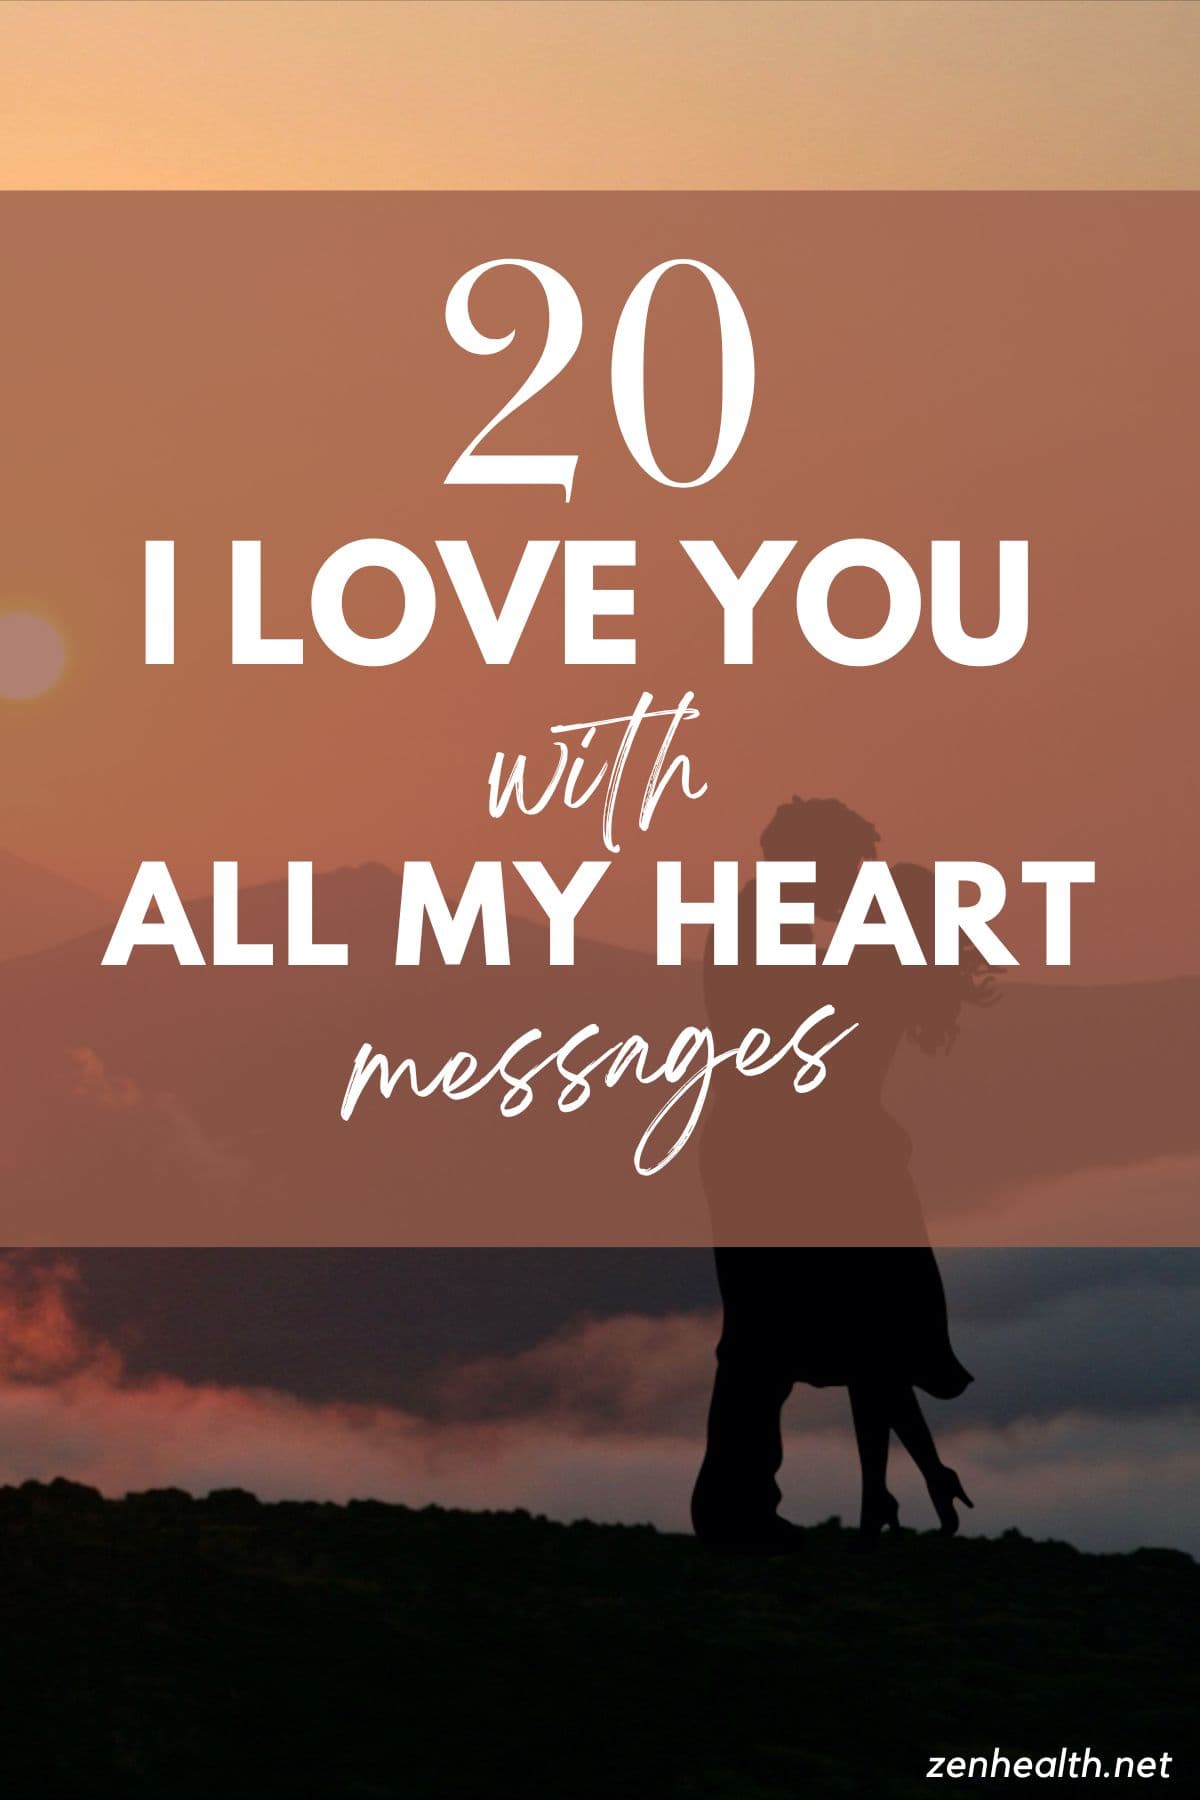 20 I love you with all my heart messages text overlay on a photo of a couple kissing with the mountains in the background